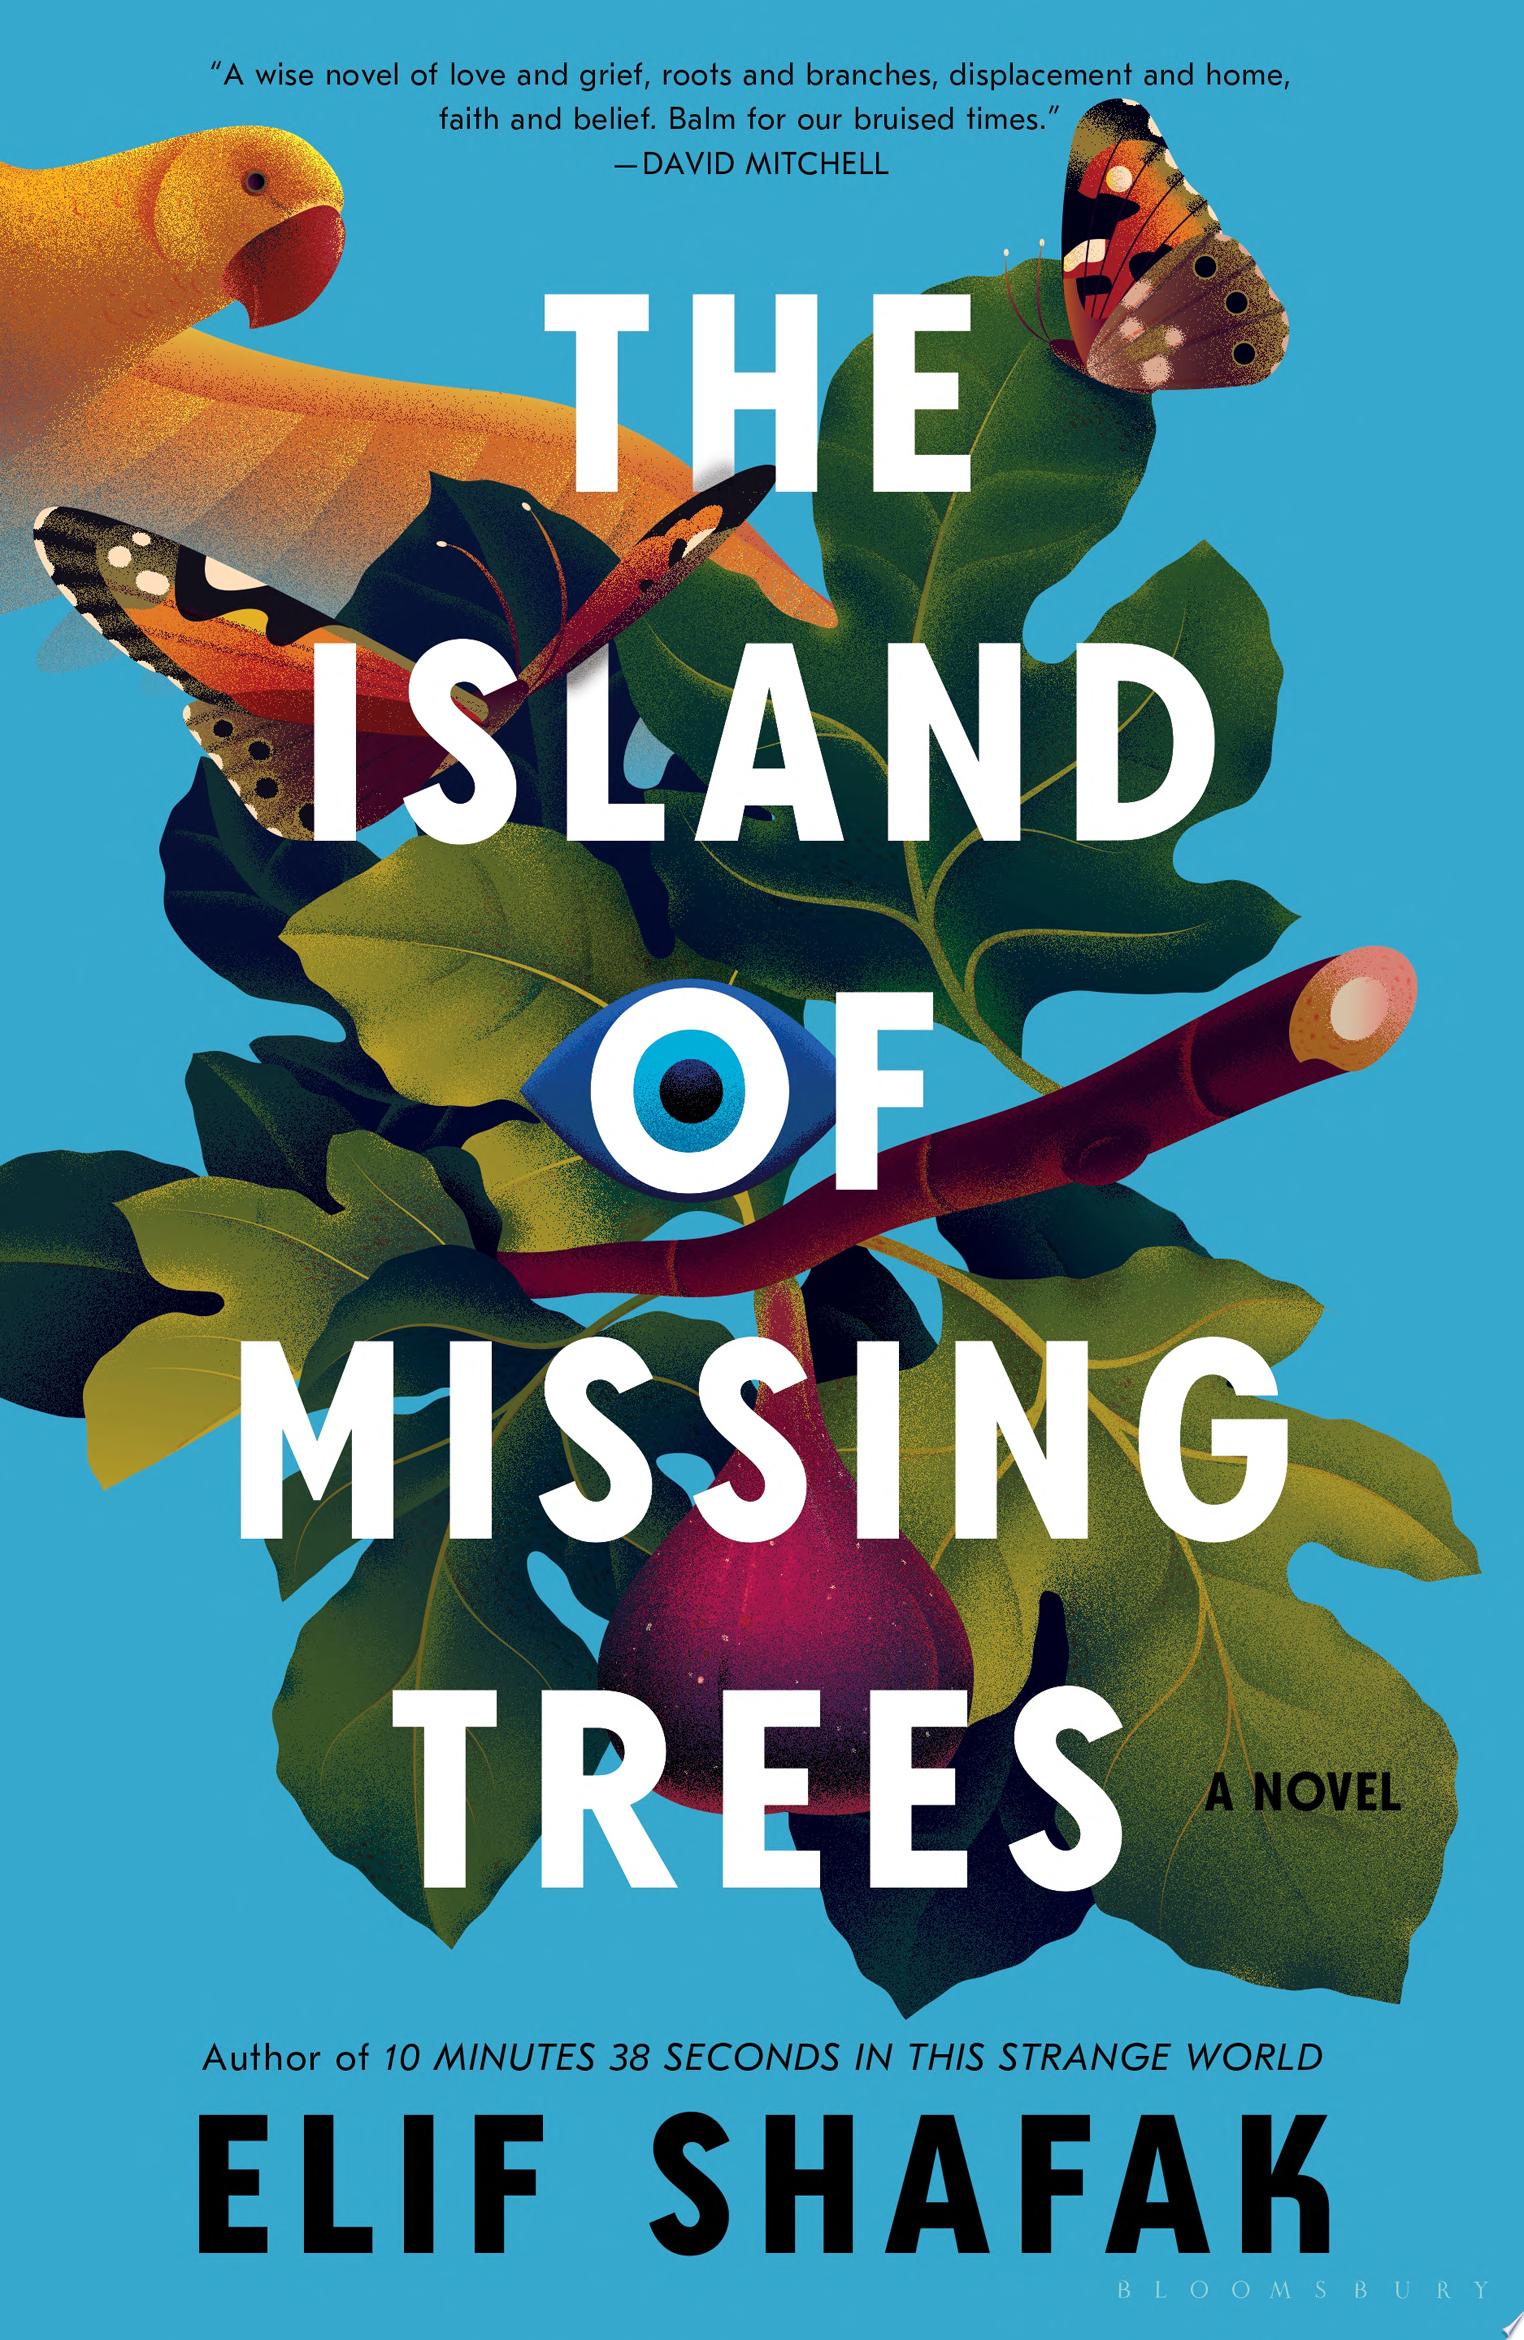 Image for "The Island of Missing Trees"